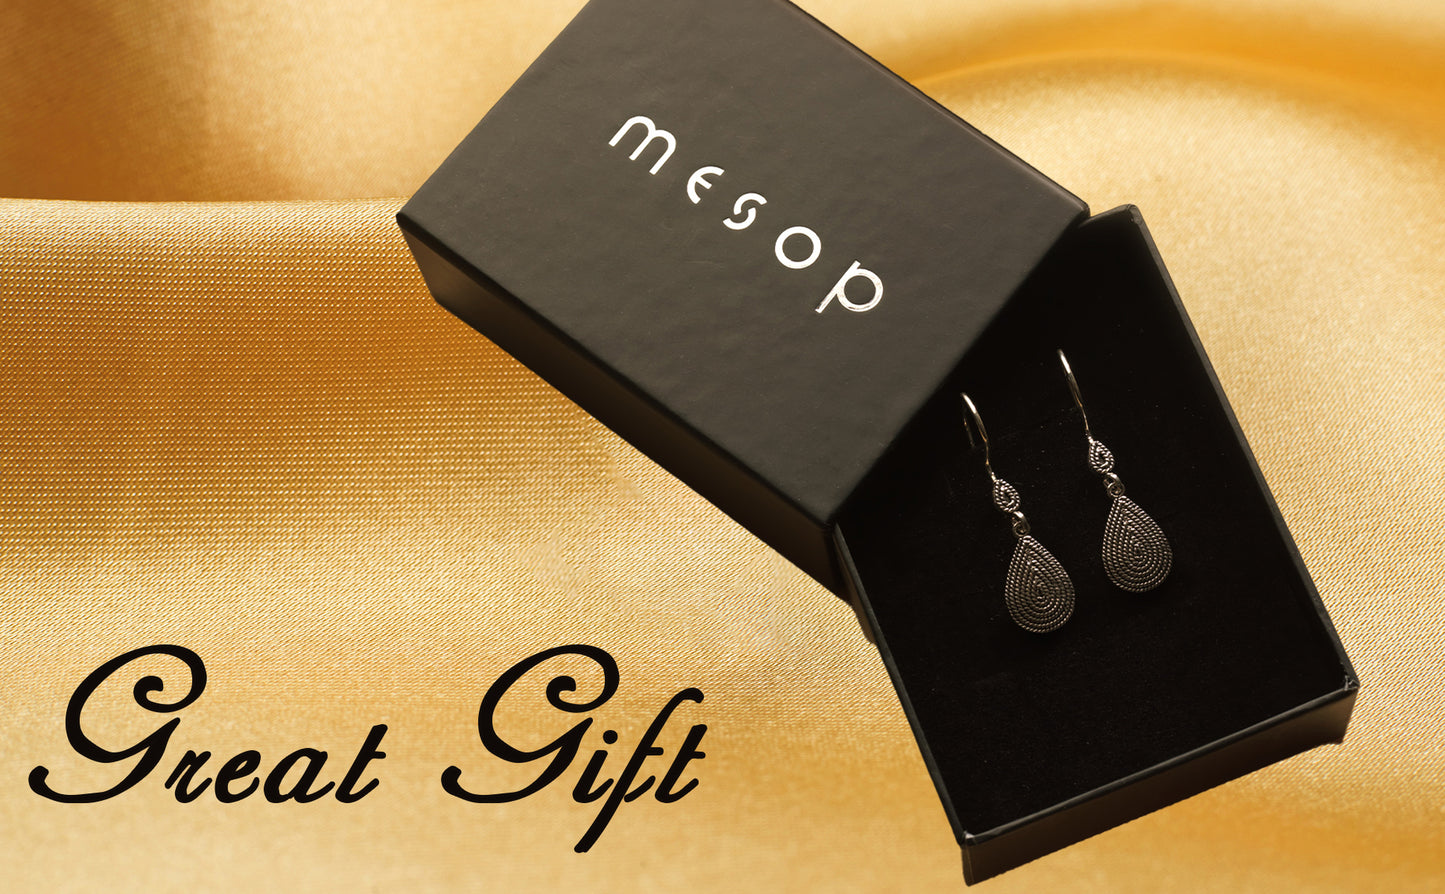 MESOP Teardrop Womens Silver Earrings, 925 Sterling Silver Drop Earrings, Timeless Mesopotamia History Inspired, Fluted Filigree Dangle Earrings and Valentines Day Gift